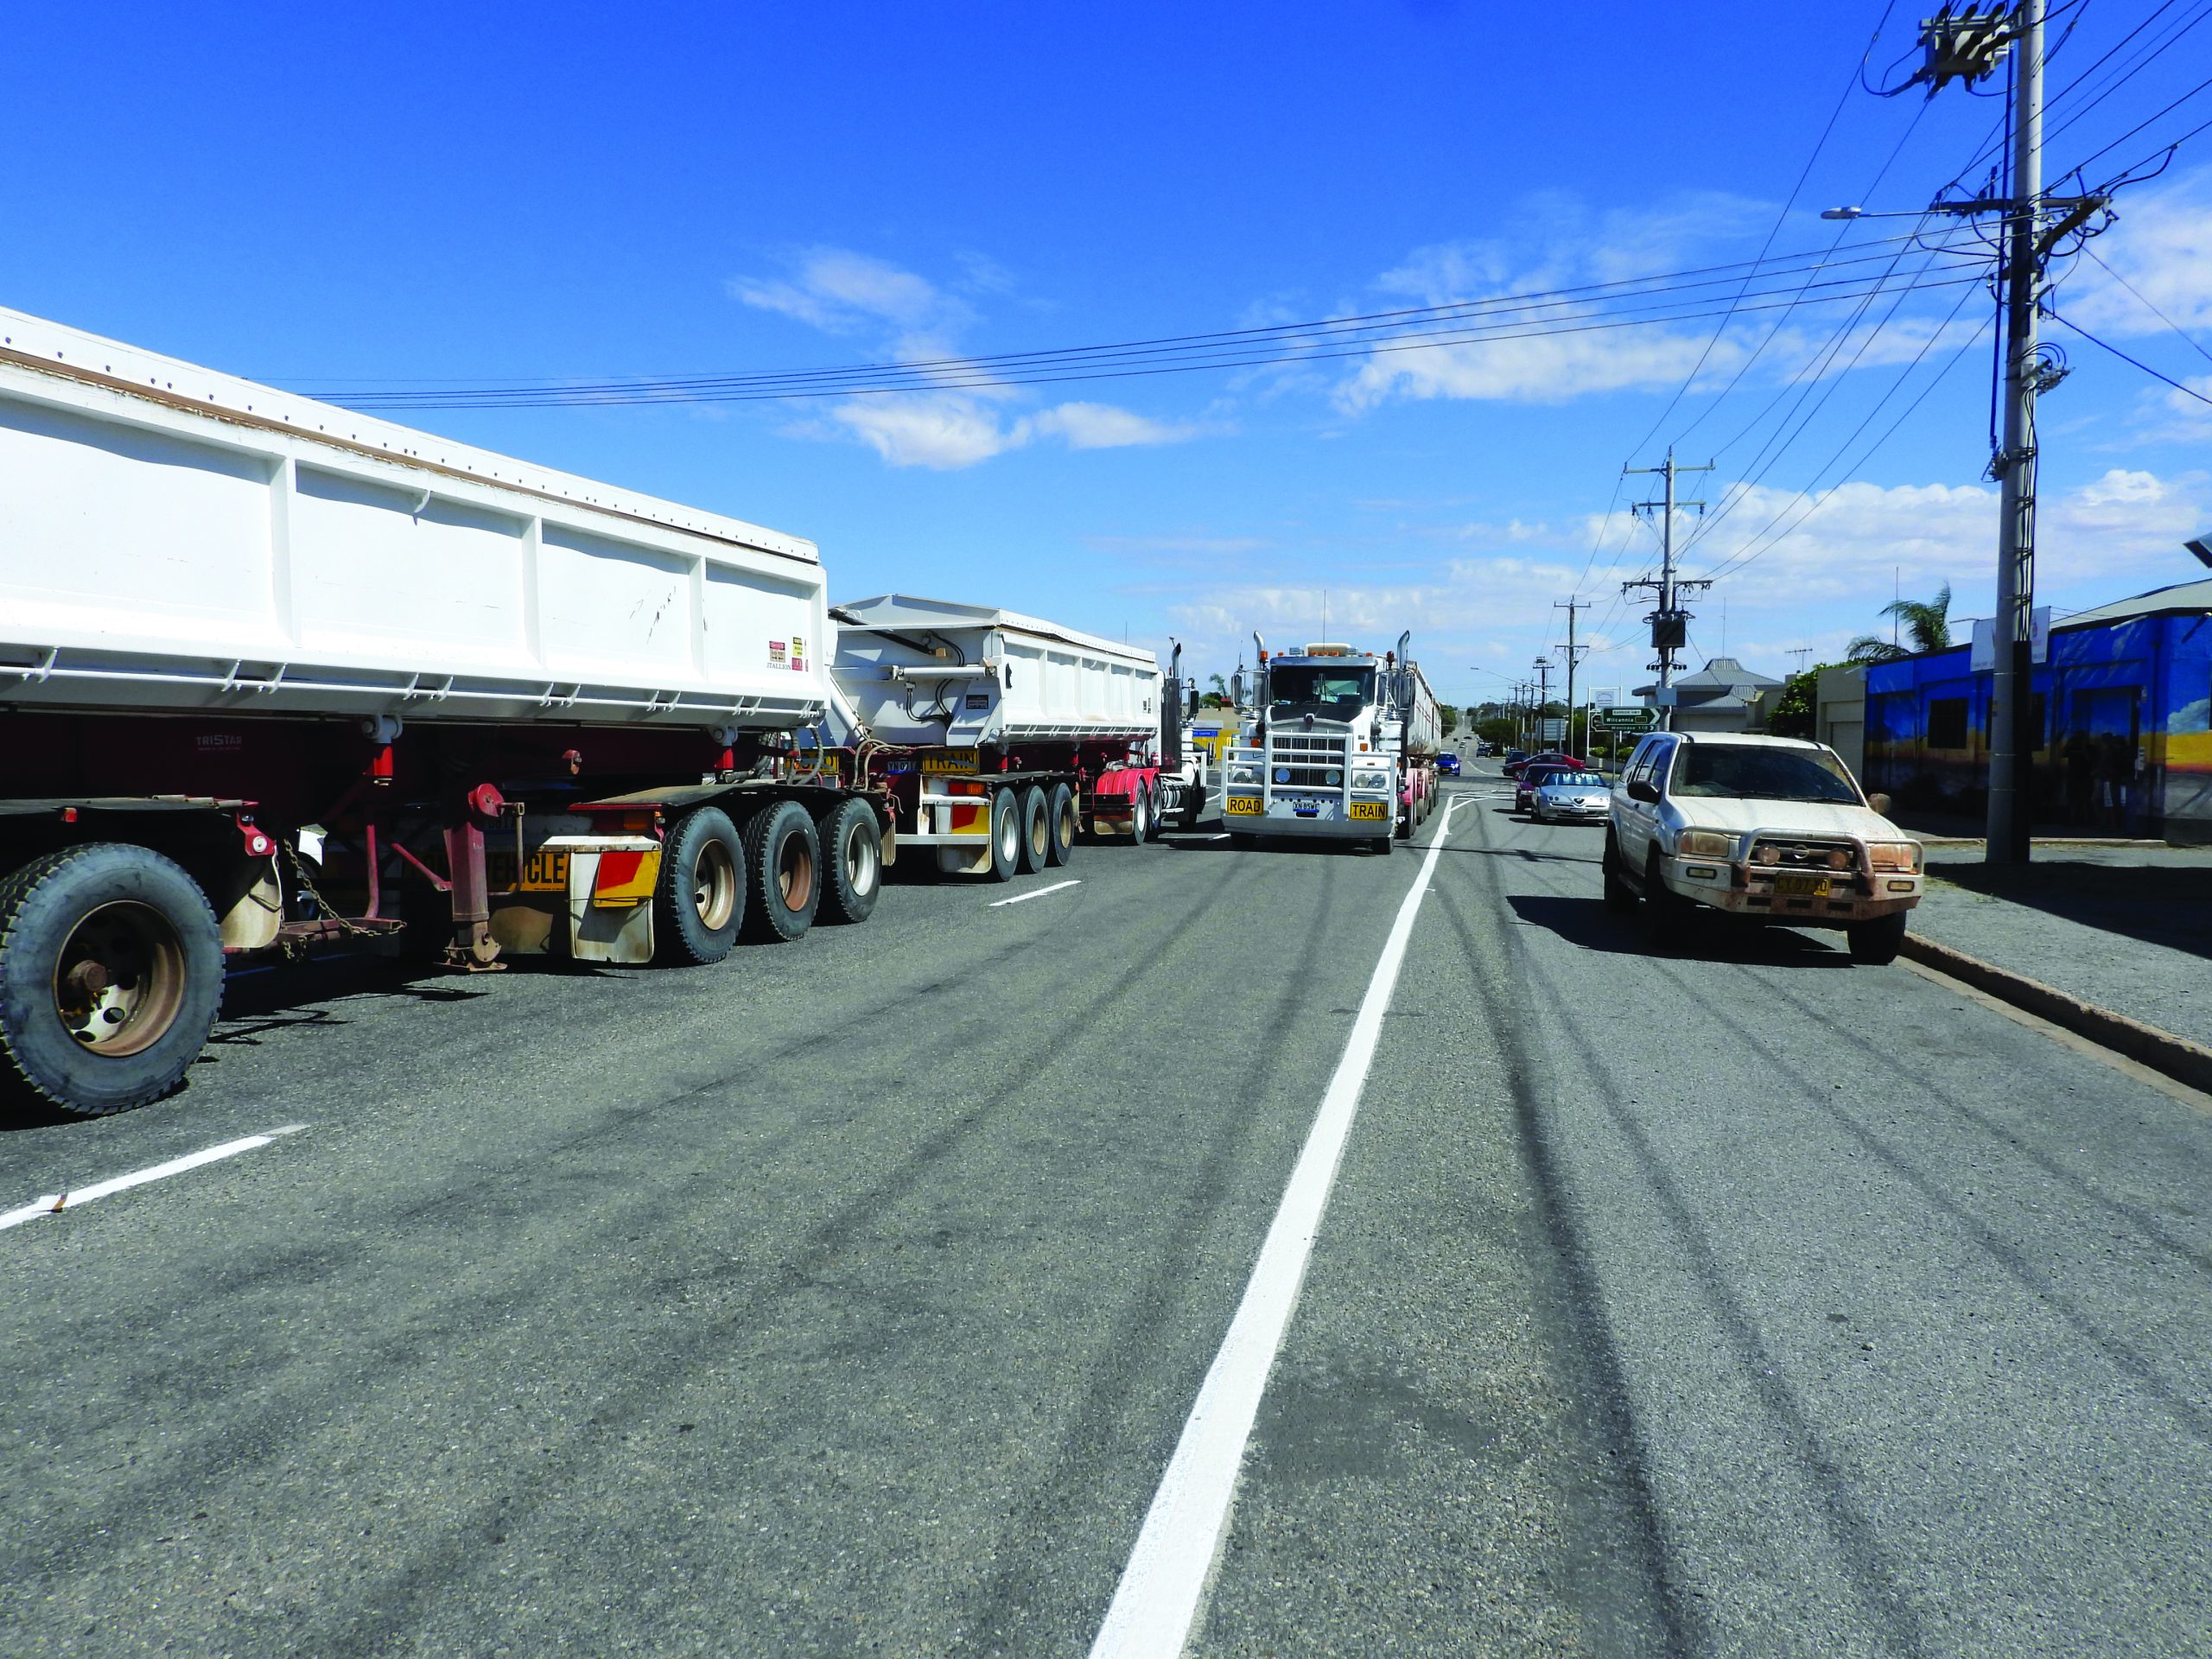 Semitrailers pictured on Iodide St. PICTURE: EVE-LYN KENNEDY